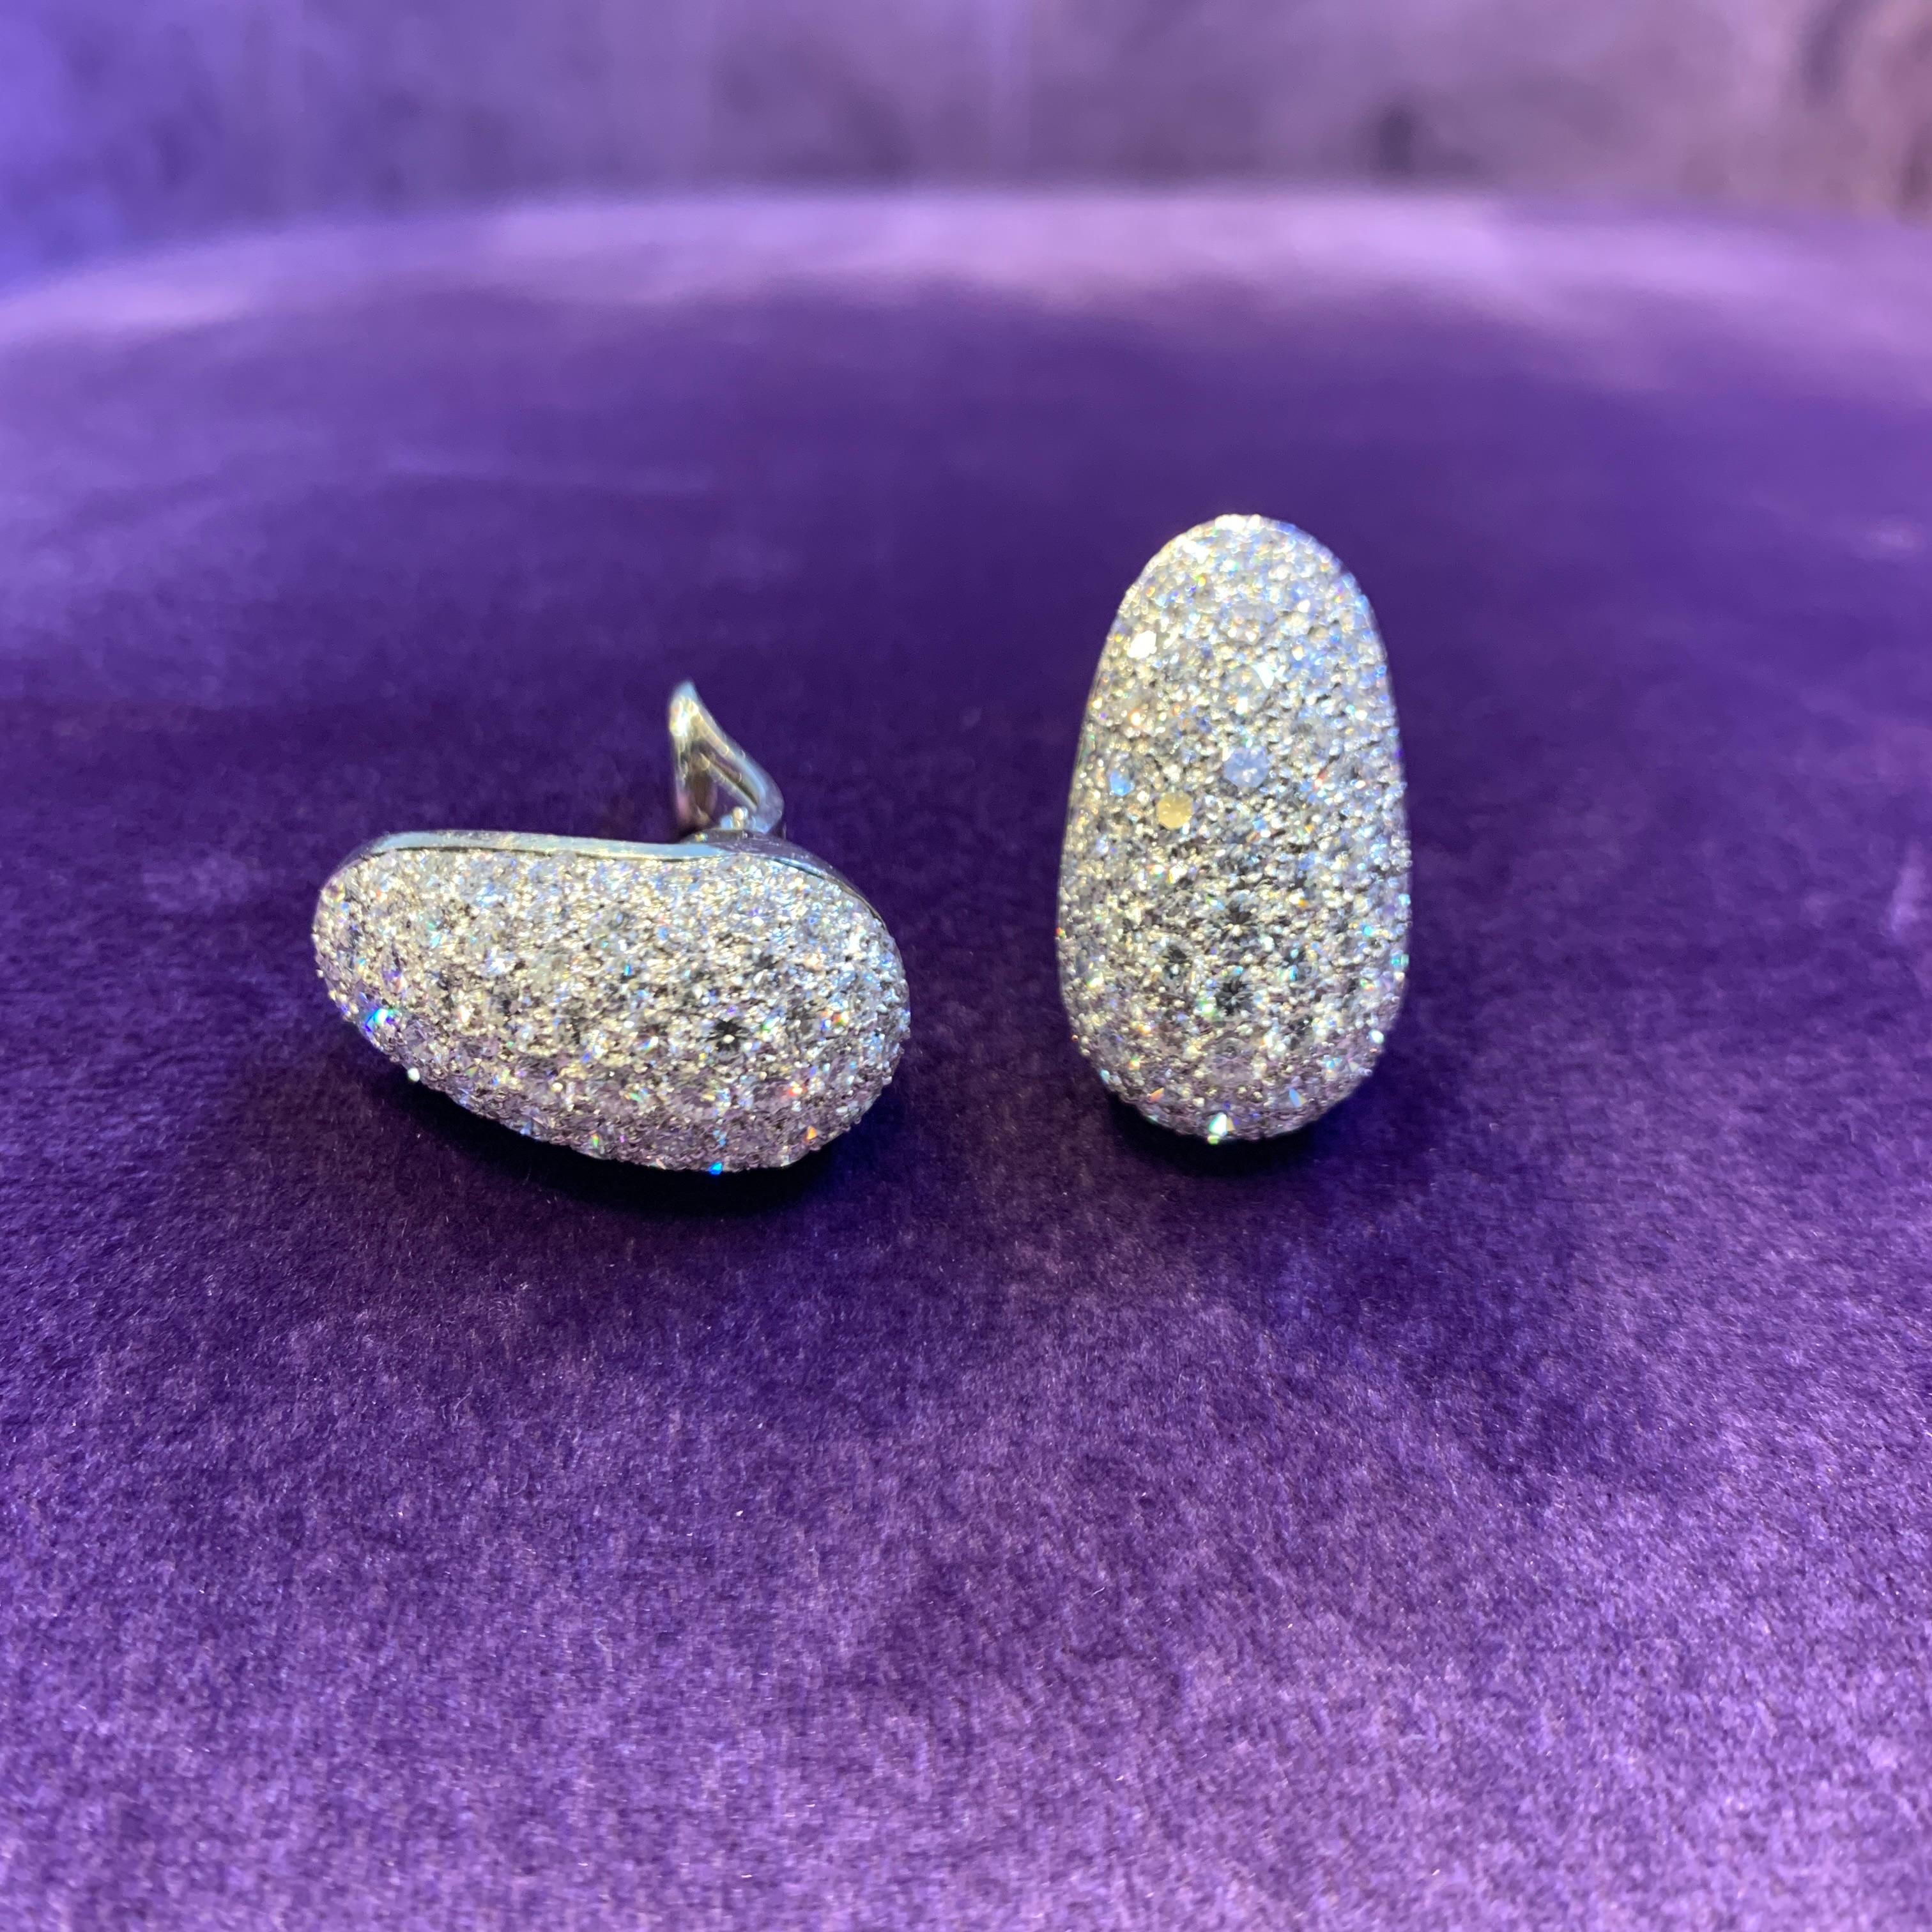 Van Cleef & Arpels Pave Diamond Earrings In Excellent Condition For Sale In New York, NY